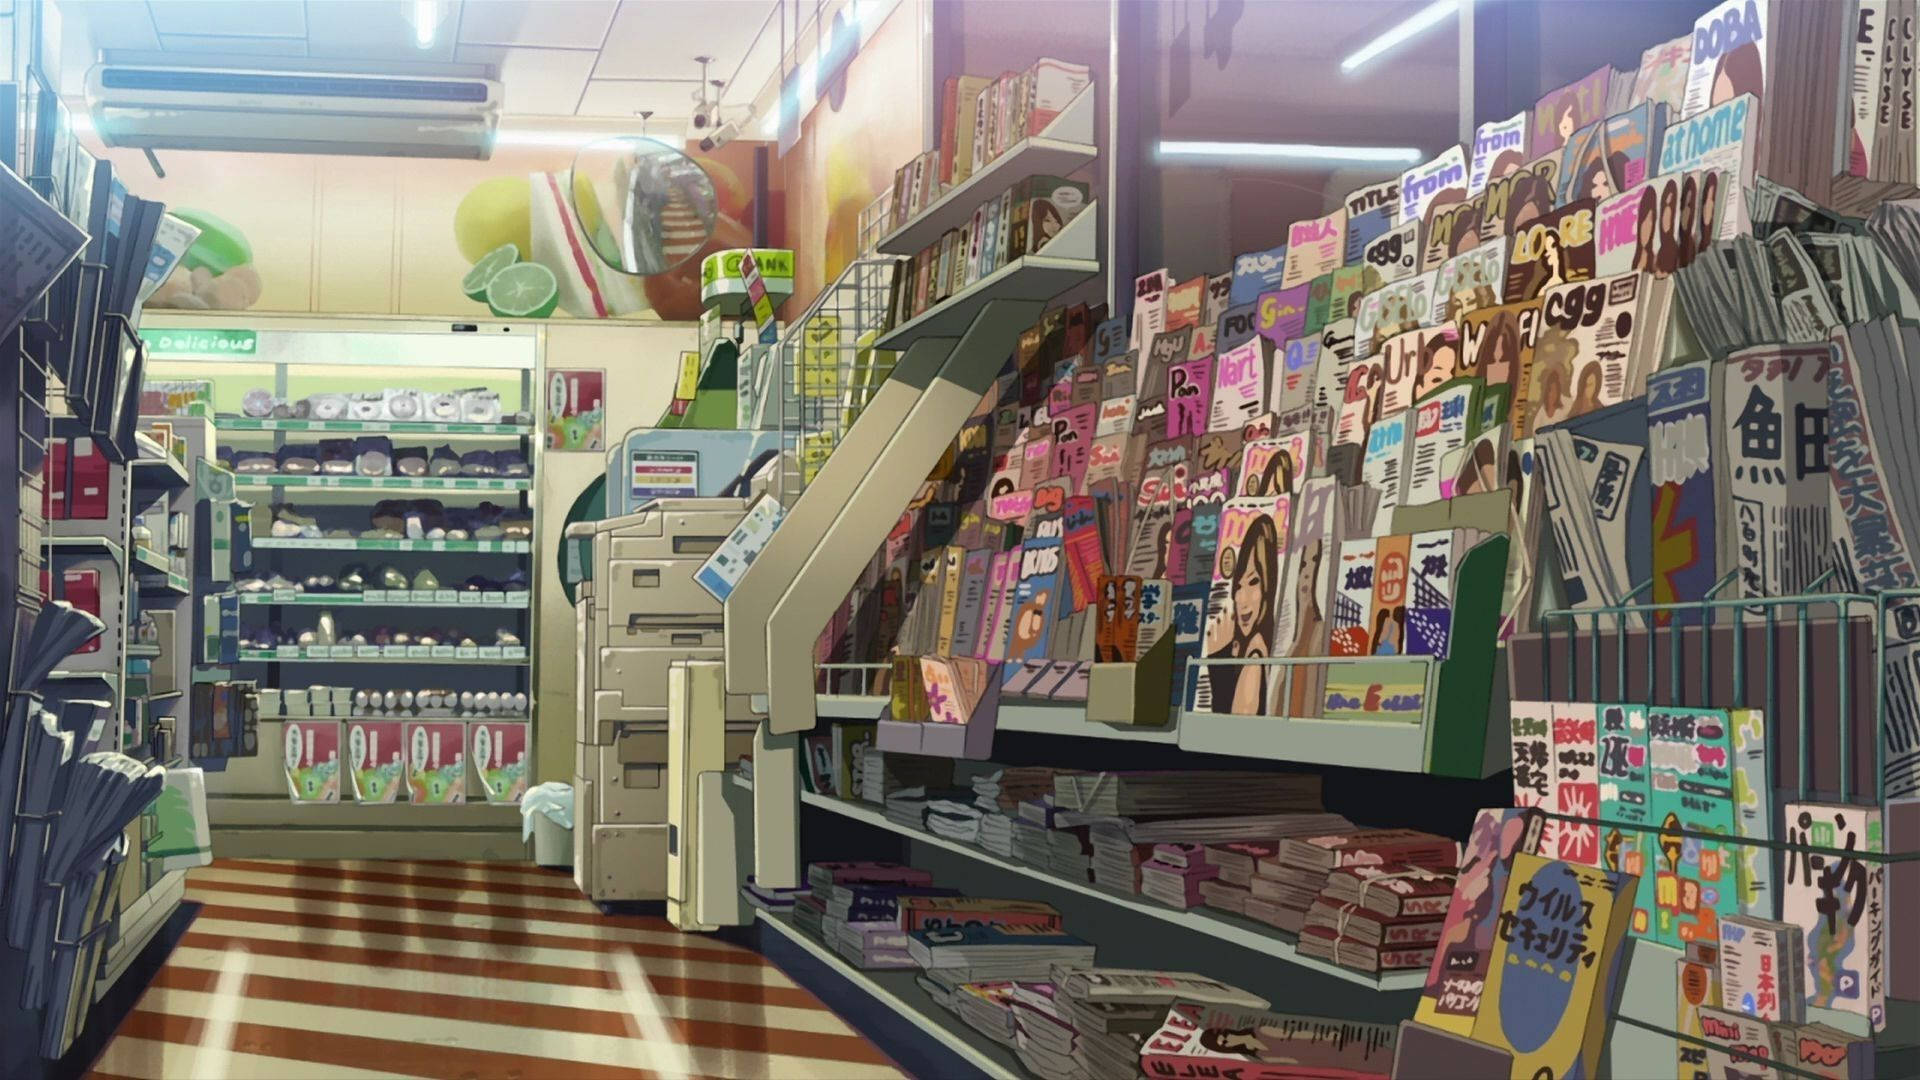 A bustling anime grocery store filled with varieties of fresh produce and goods. Wallpaper